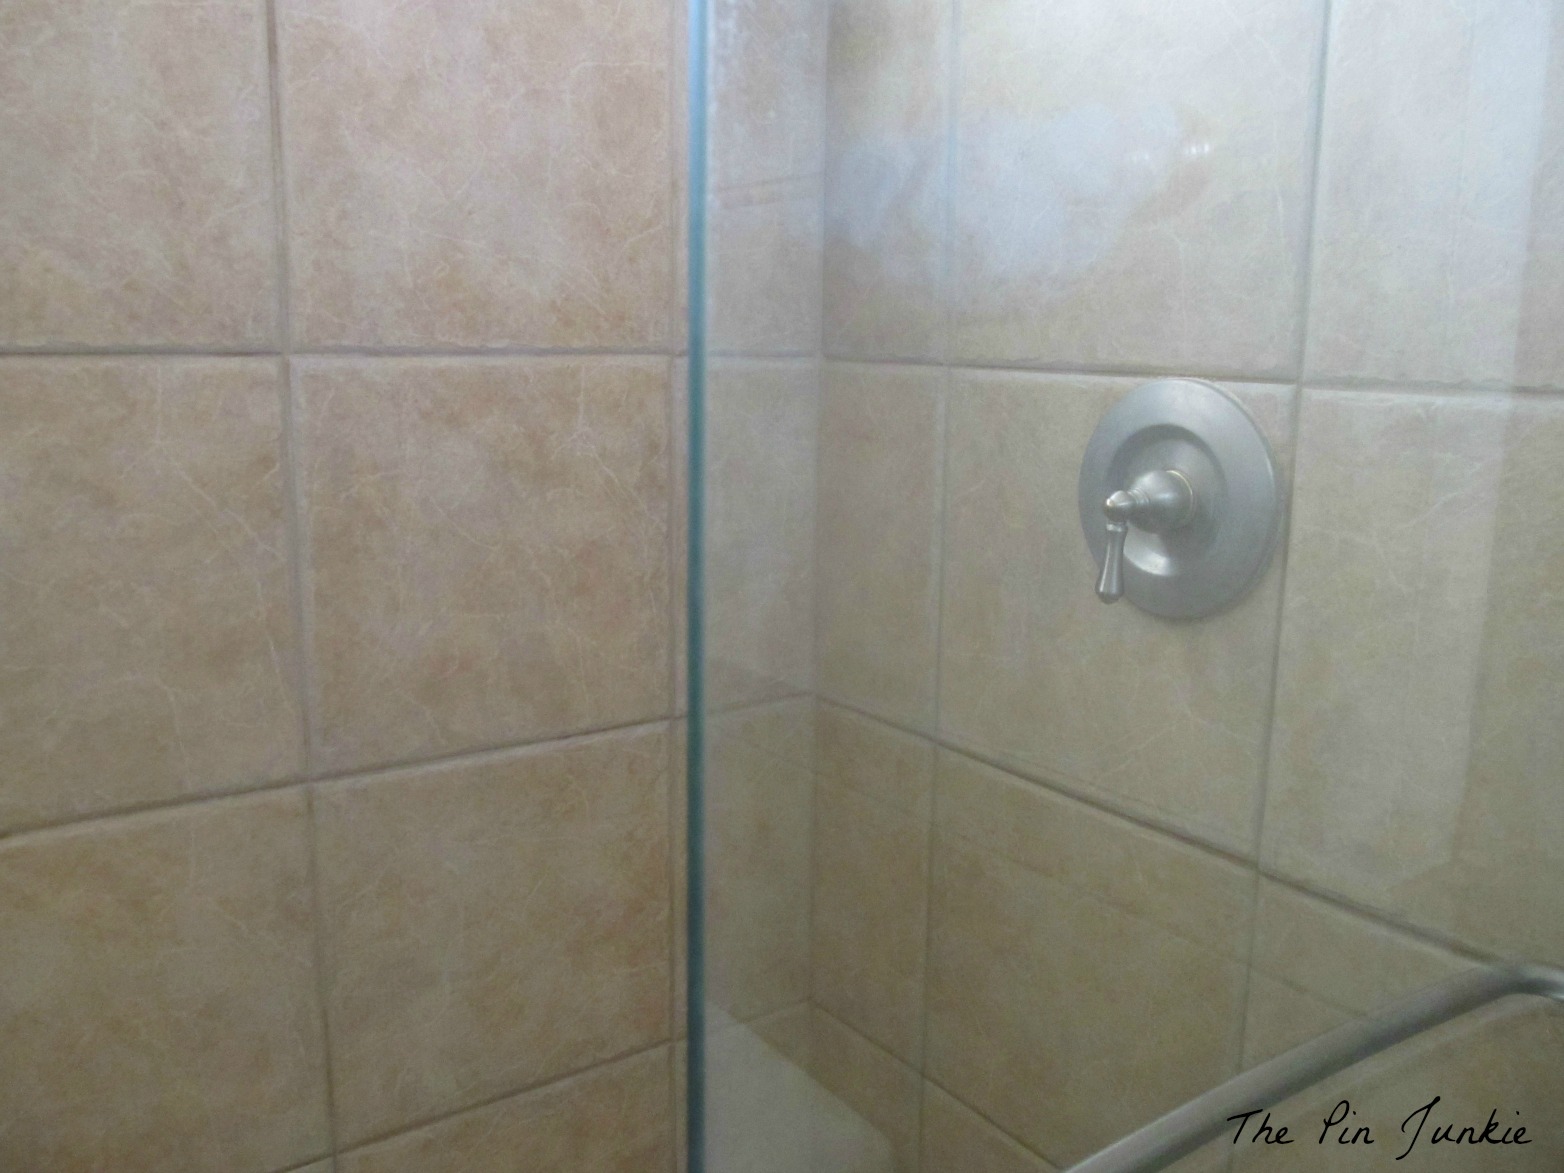 Adding RainX to your shower door to keep it clean? Yes please